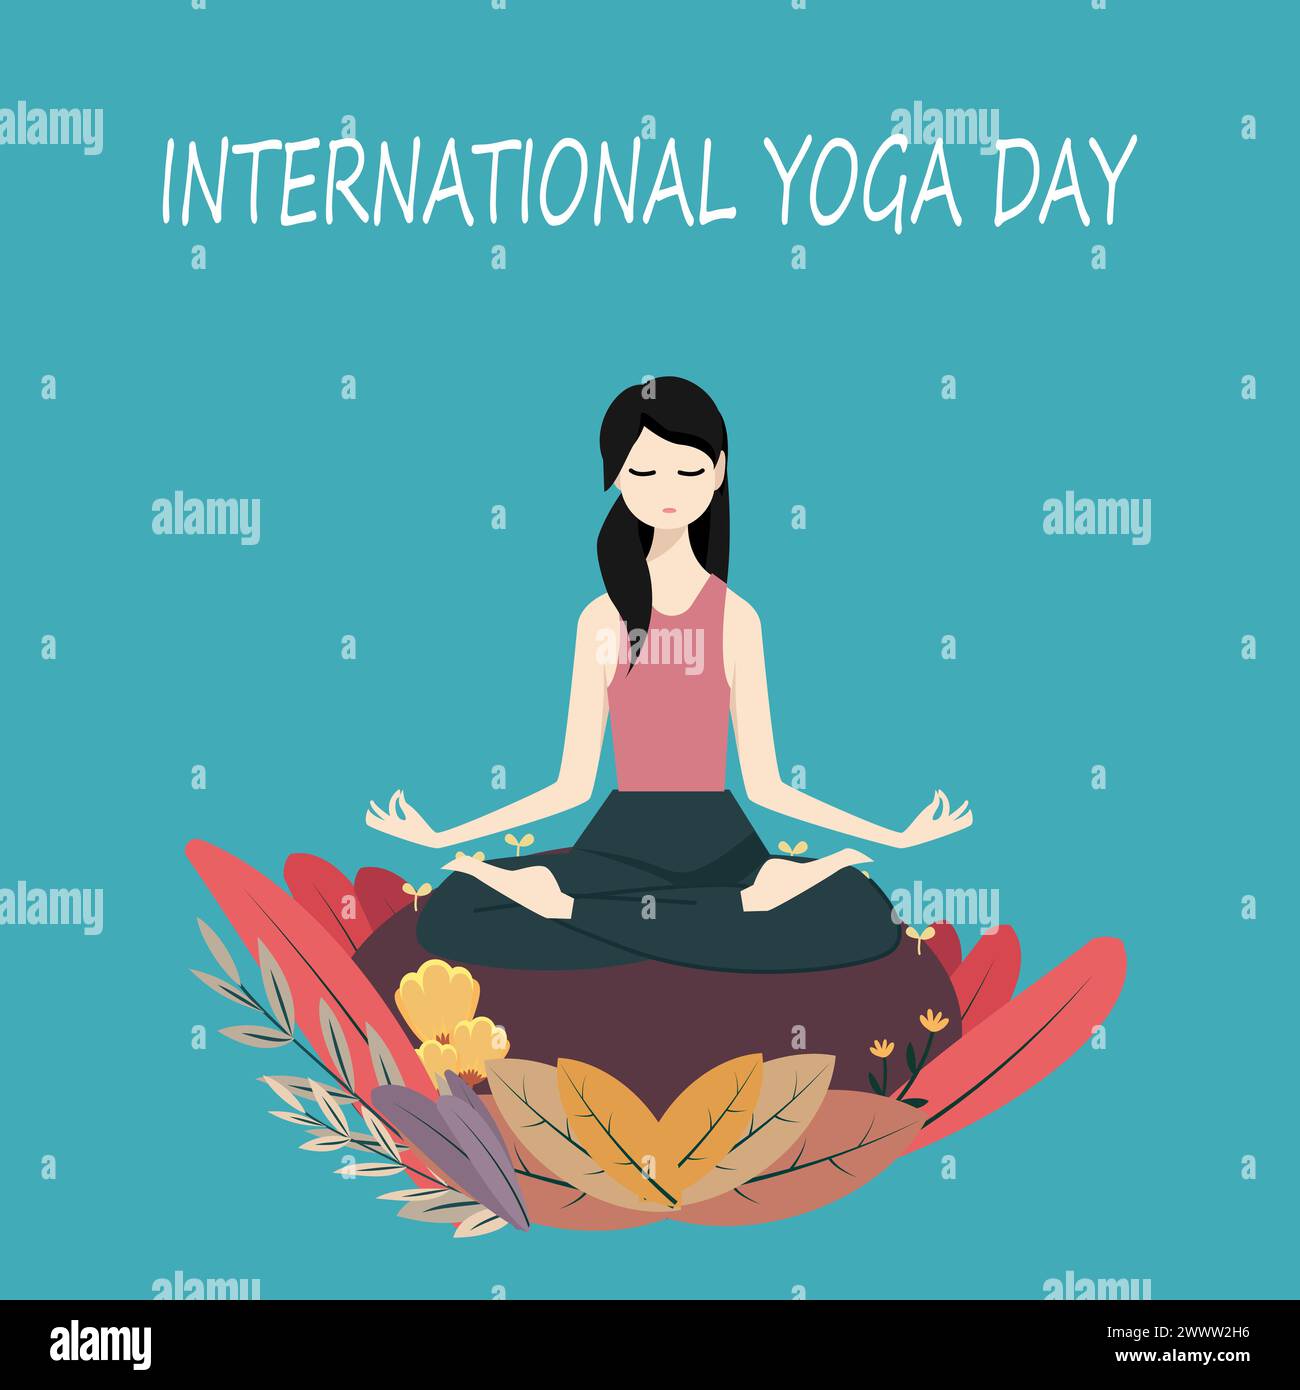 Woman Practicing Yoga character Vector Illustration, Flat And Minimalis Design, international yoga day poster vector banner, women meditate and refres Stock Vector